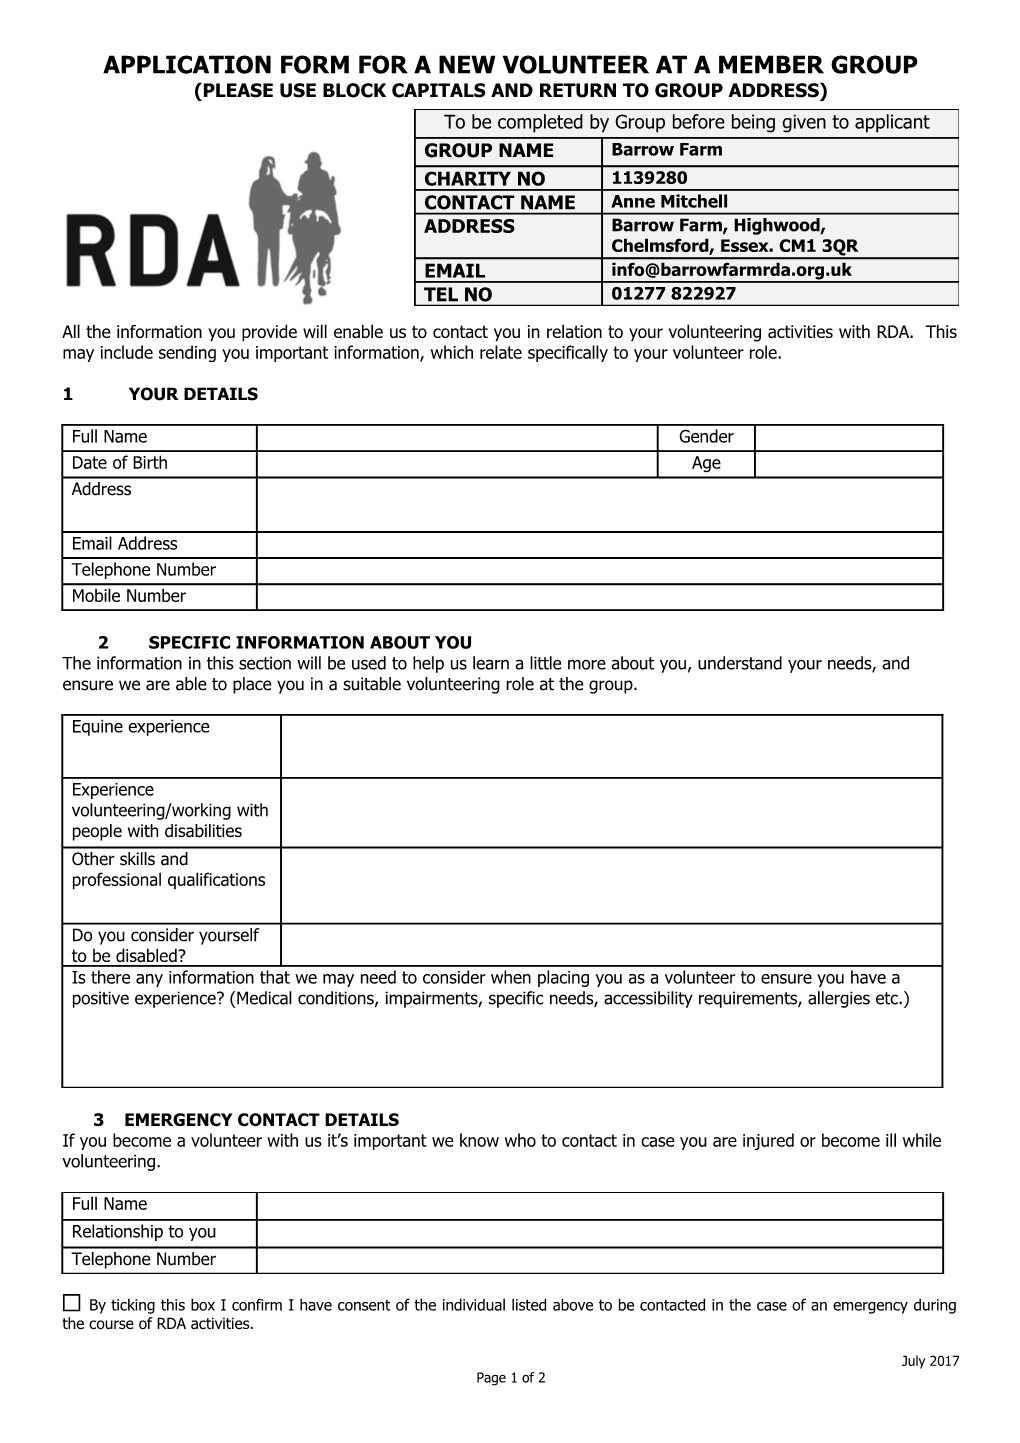 Application Form for a New Volunteer at a Member Group